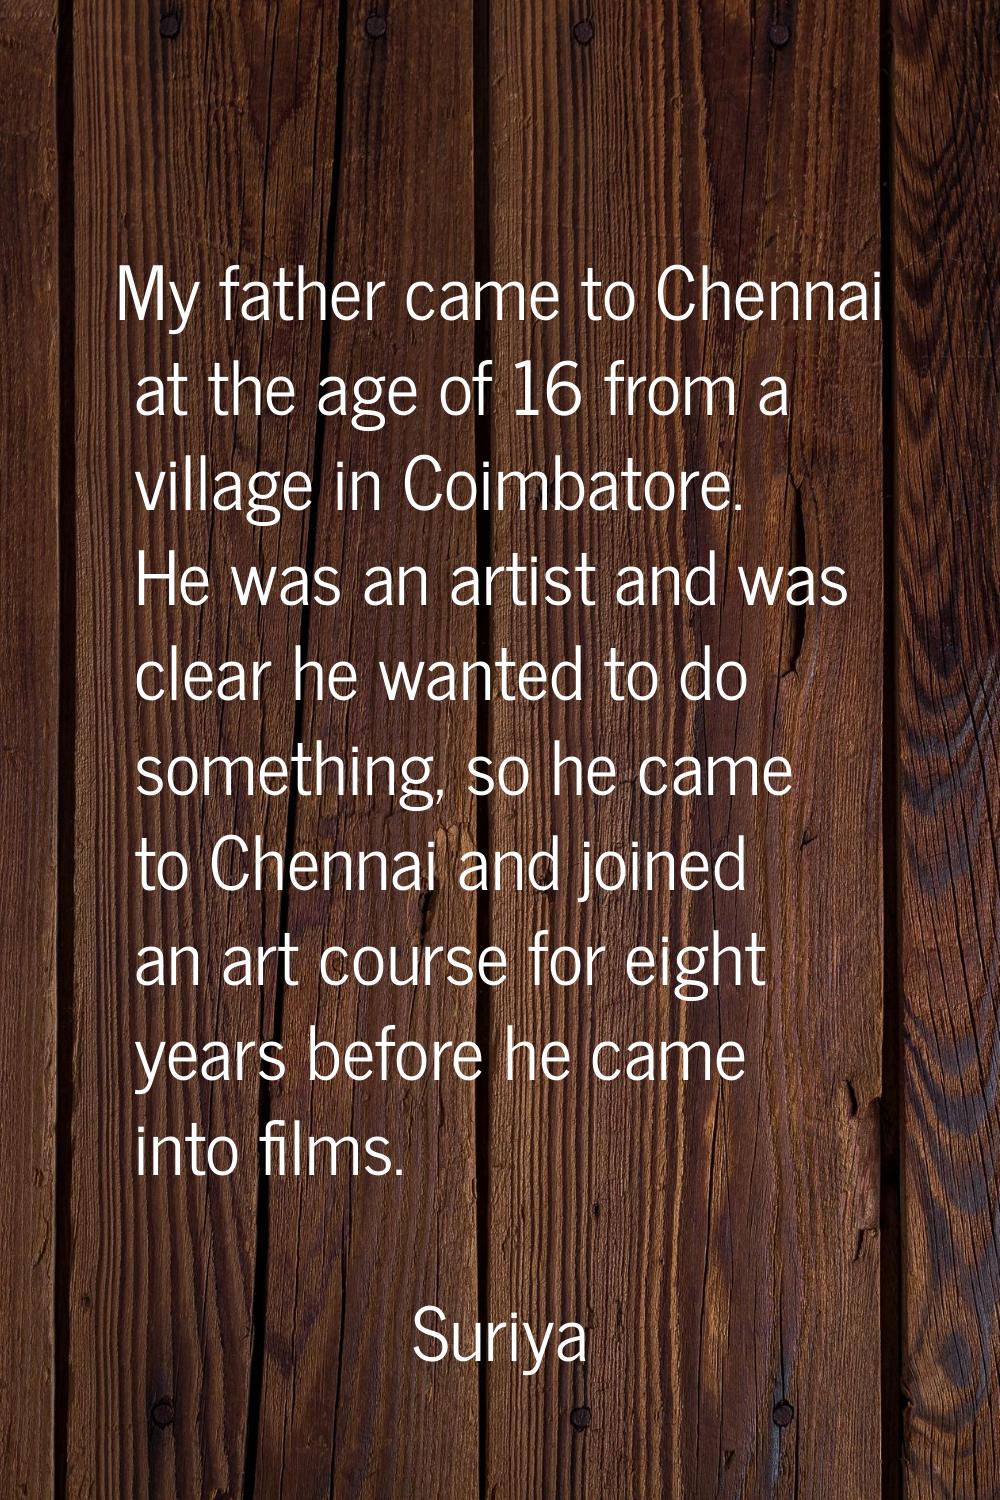 My father came to Chennai at the age of 16 from a village in Coimbatore. He was an artist and was c